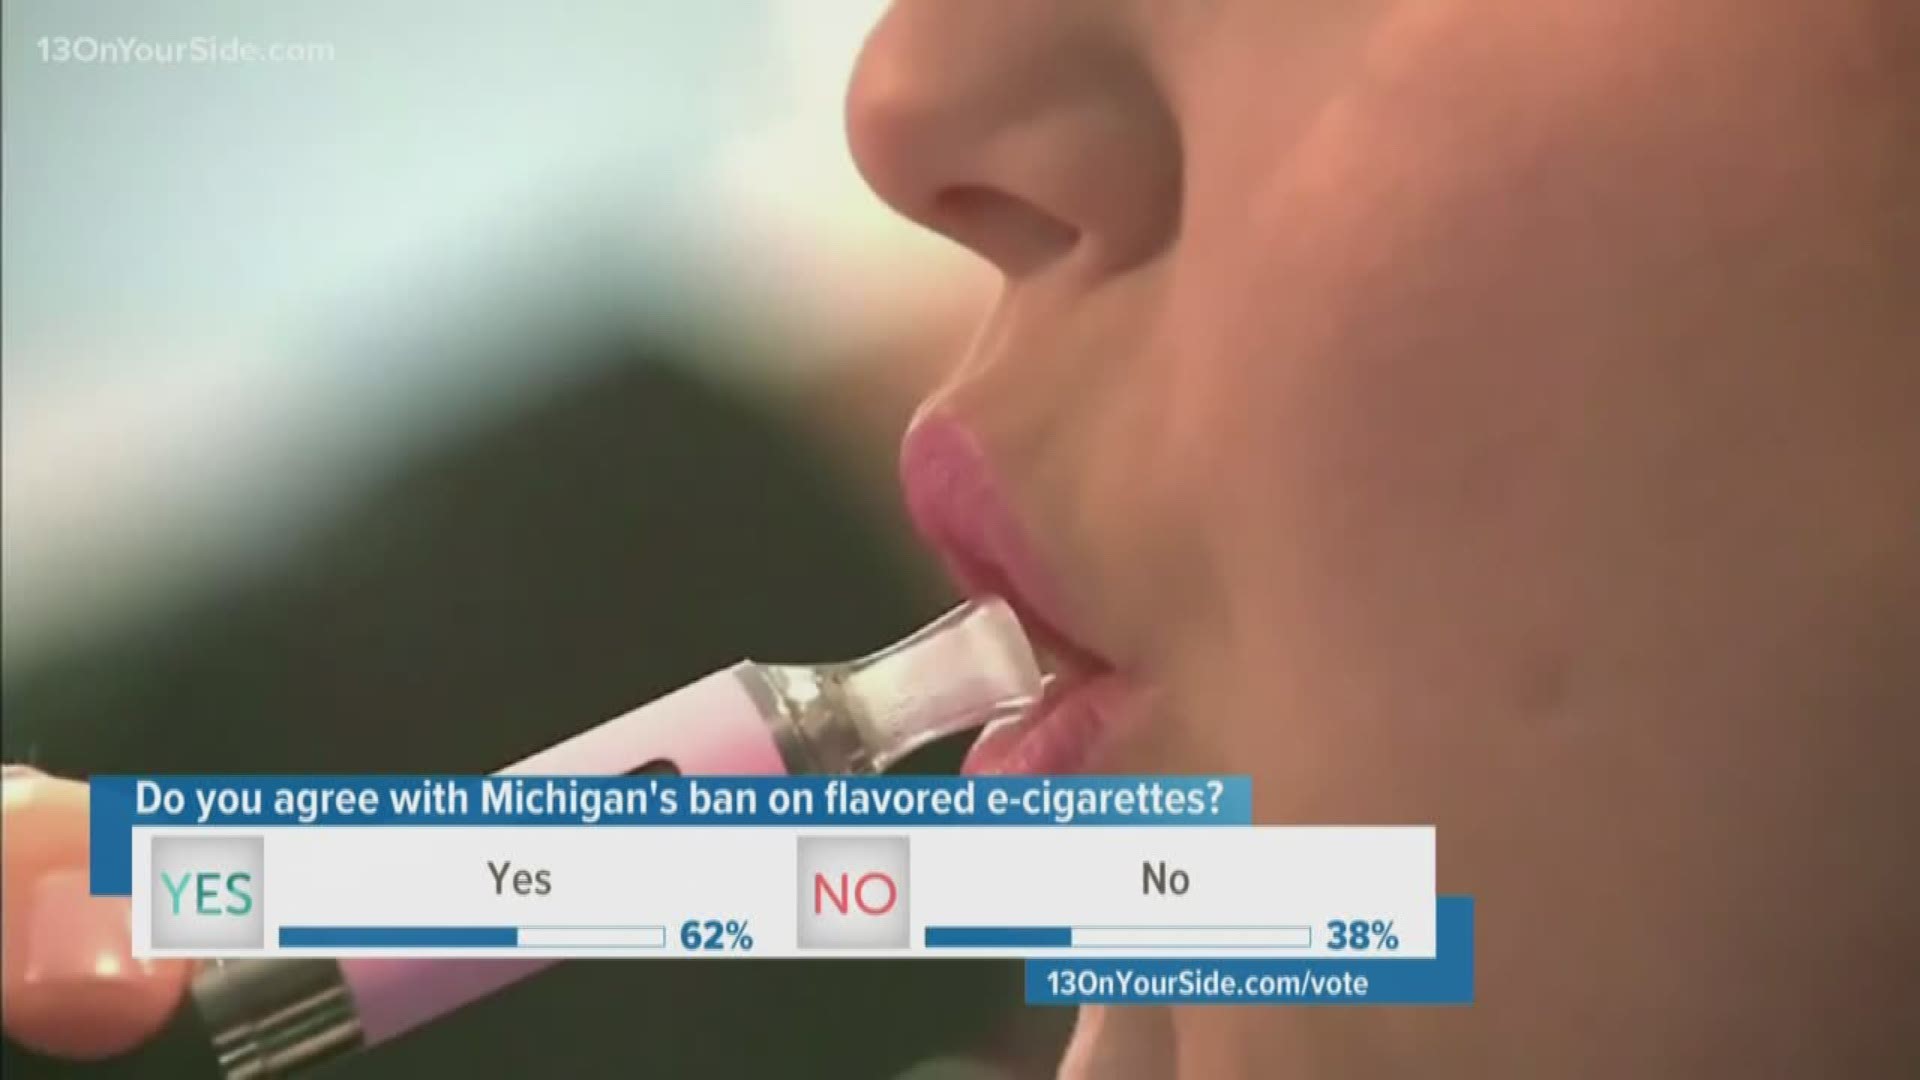 Michigan was the first state in the nation to ban the sale of flavored nicotine vaping products such as e-cigarettes.